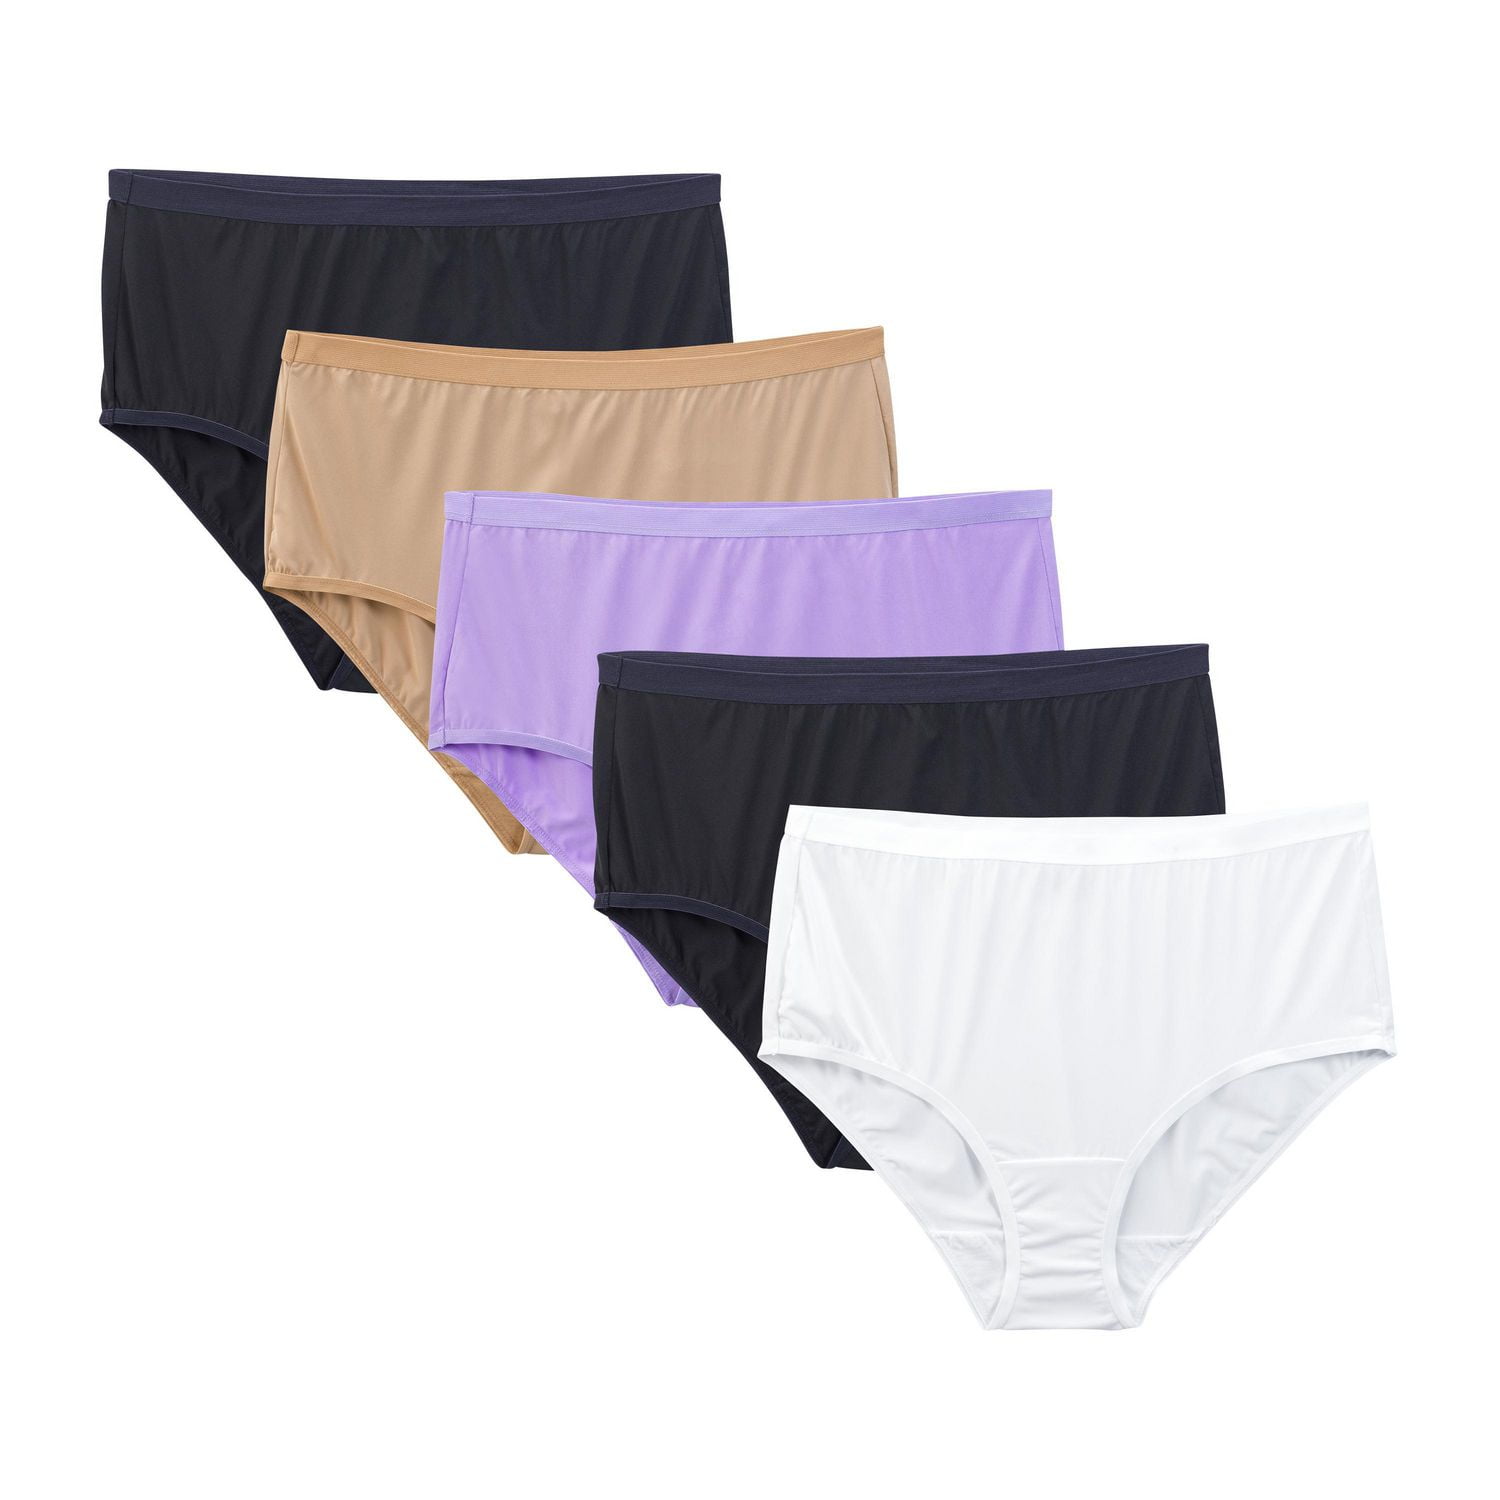 FRUIT OF THE LOOM FIT FOR ME 20 PK WHITE WOMAN'S BRIEFS 100